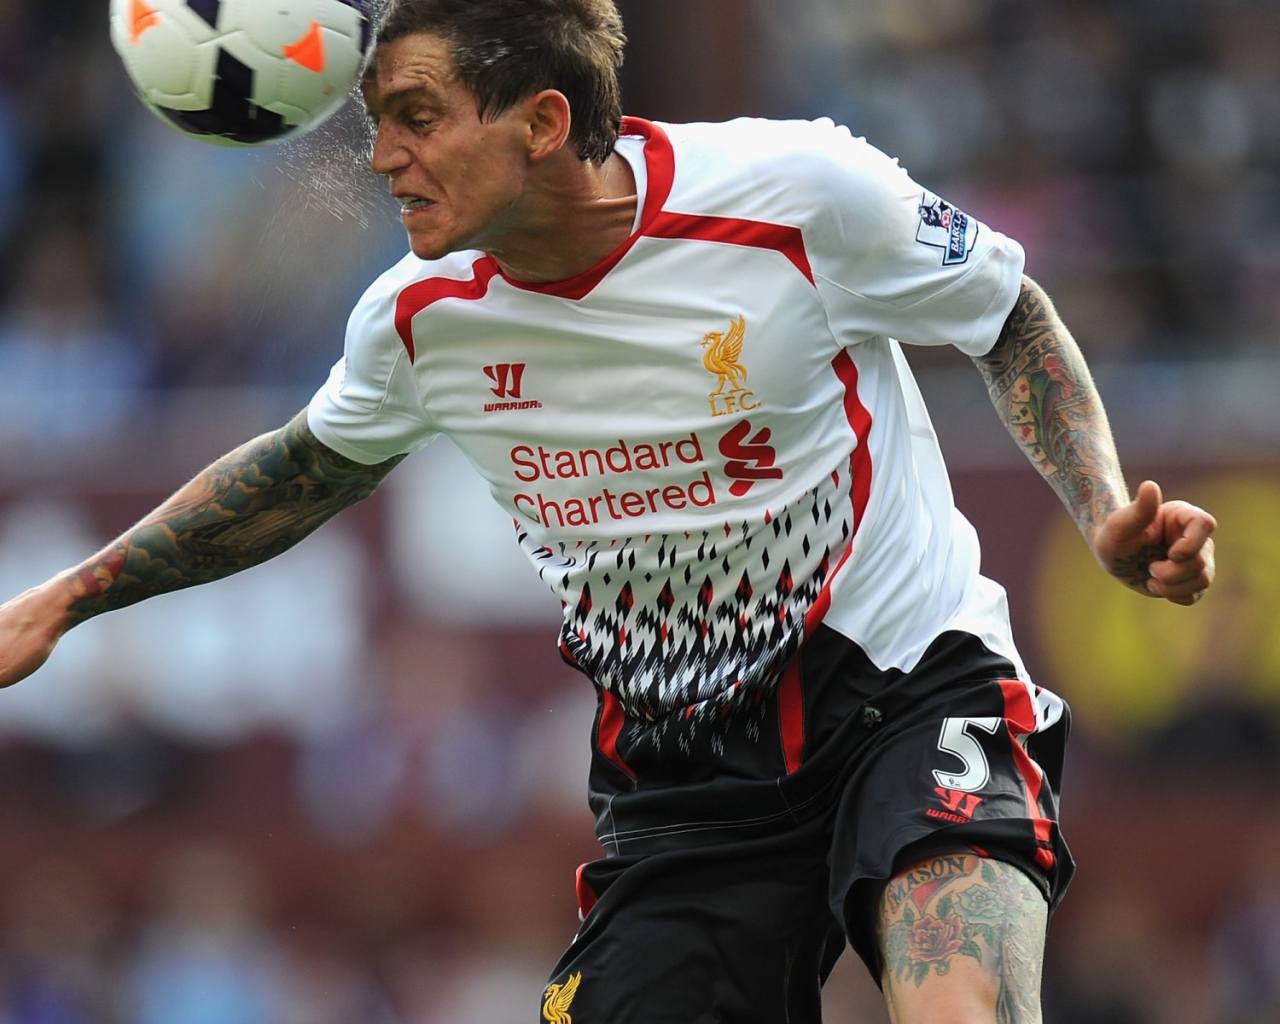 The player of Liverpool Daniel Agger is hitting a ball